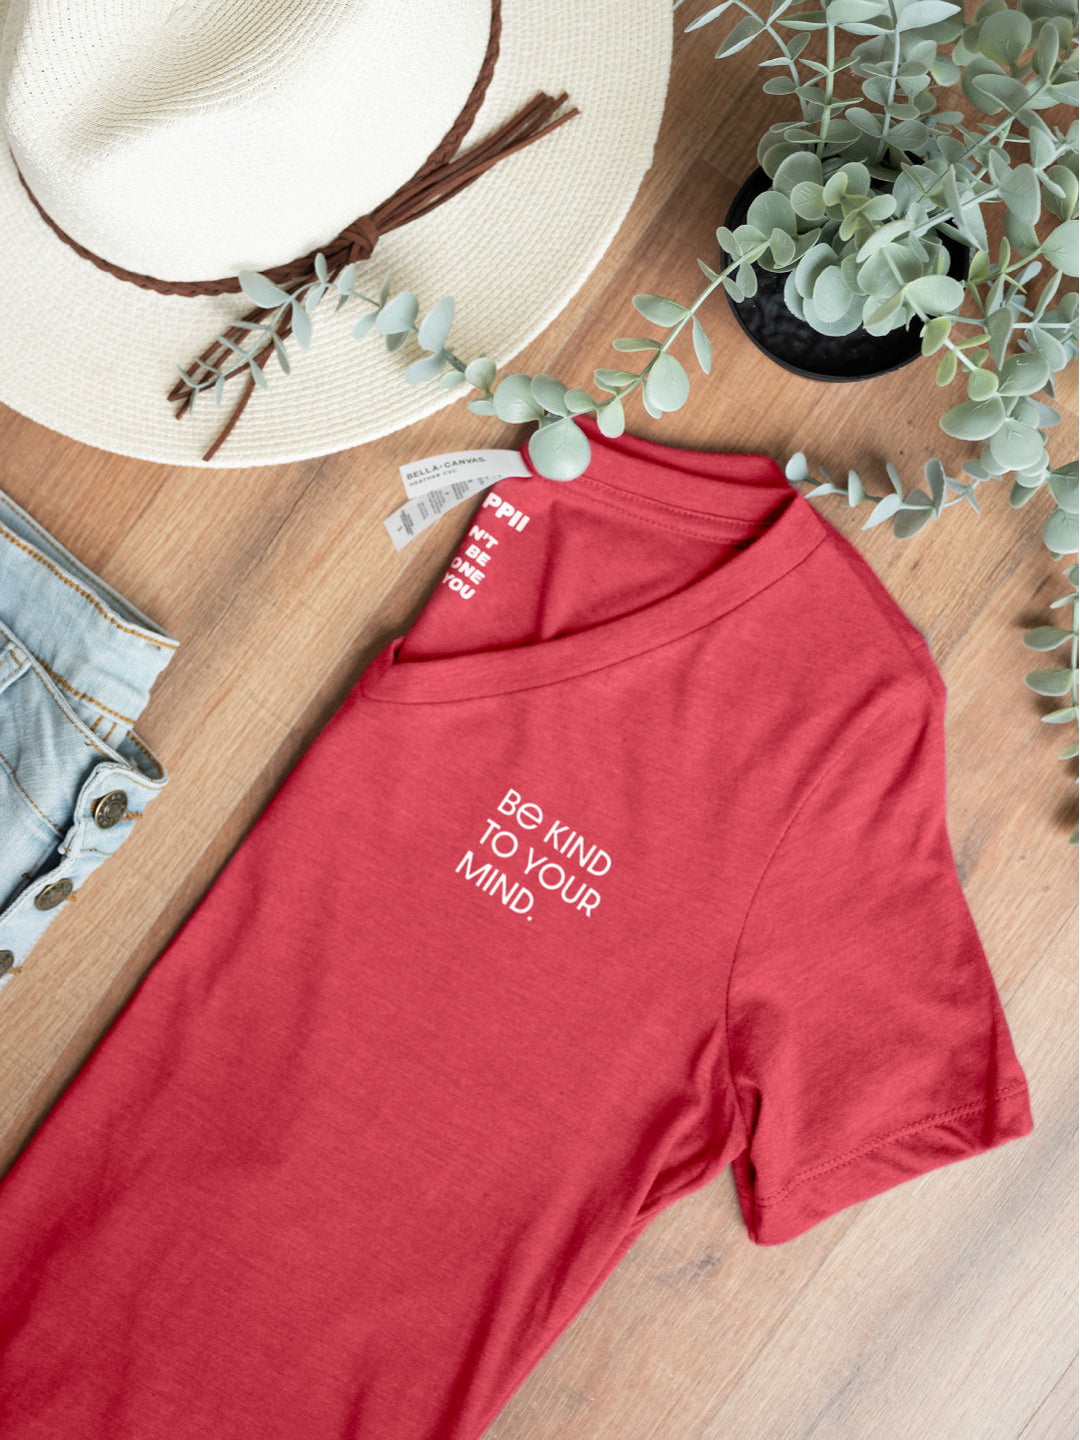 Be Kind to Your Mind | Women's Relaxed V-Neck Shirt